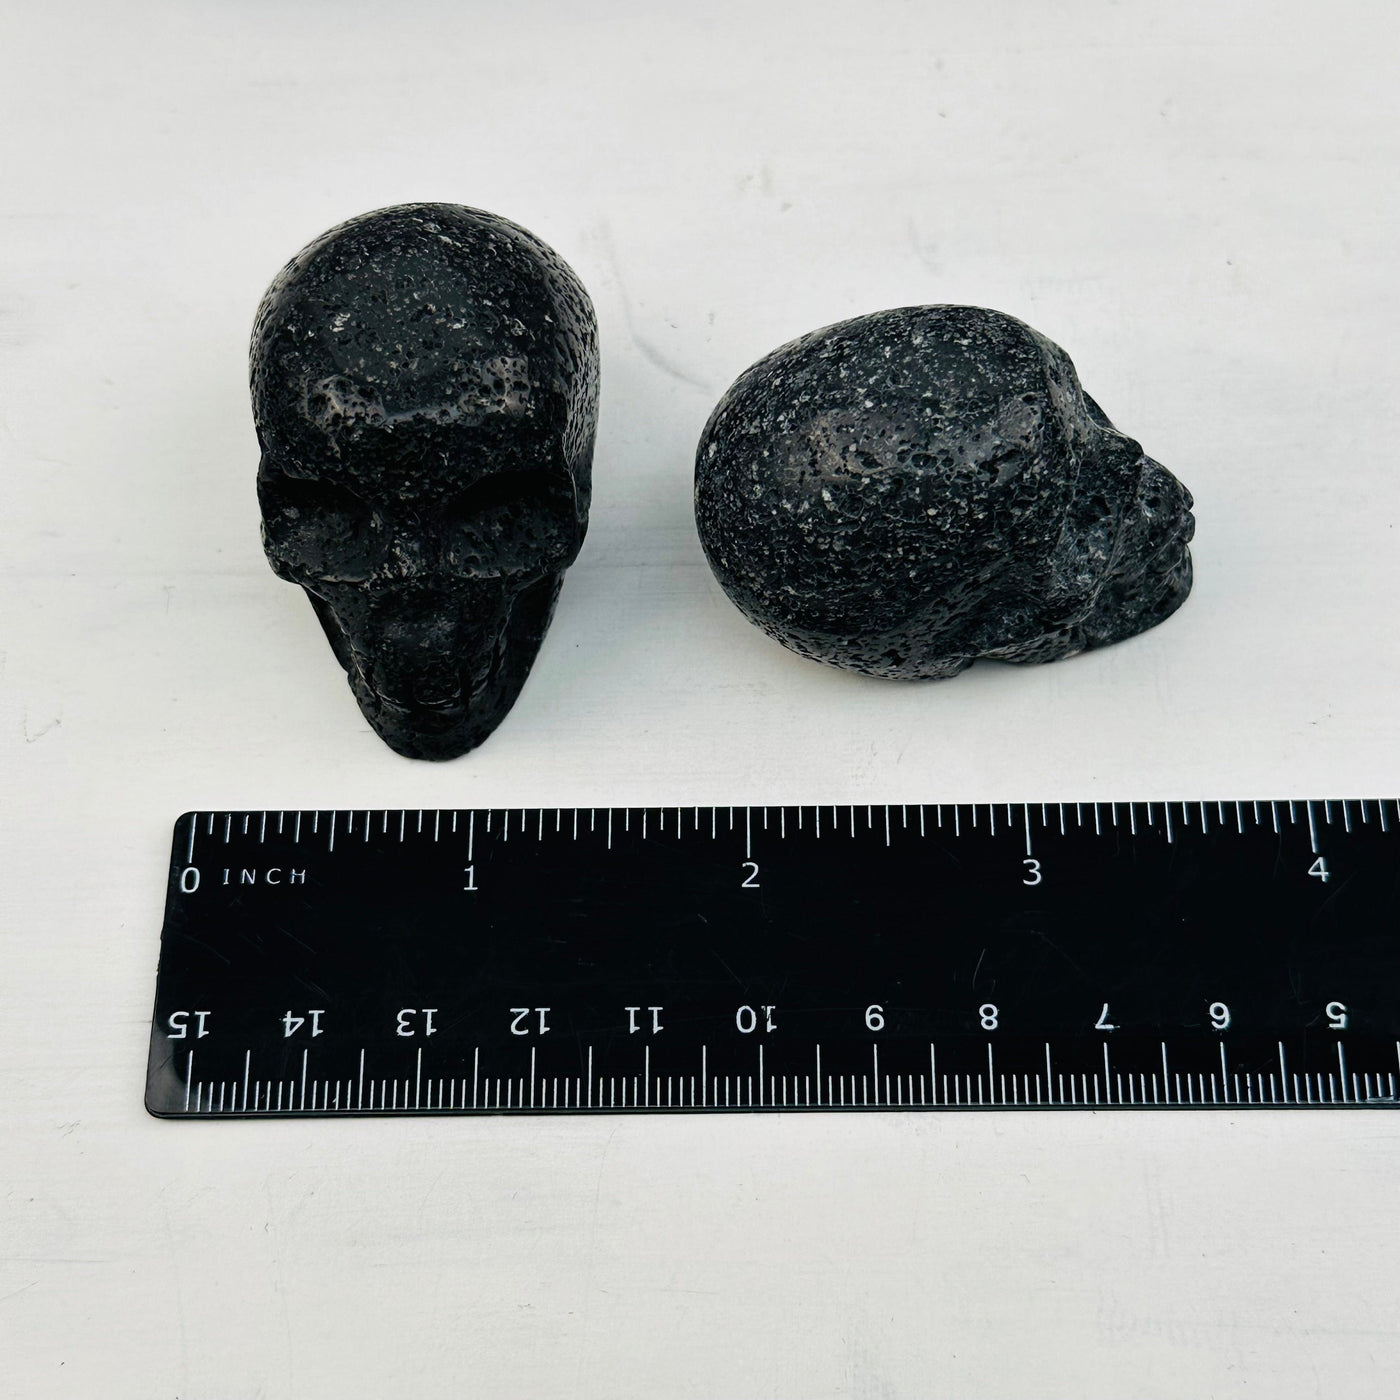 Volcanic Skull Heads next to a ruler for size reference 